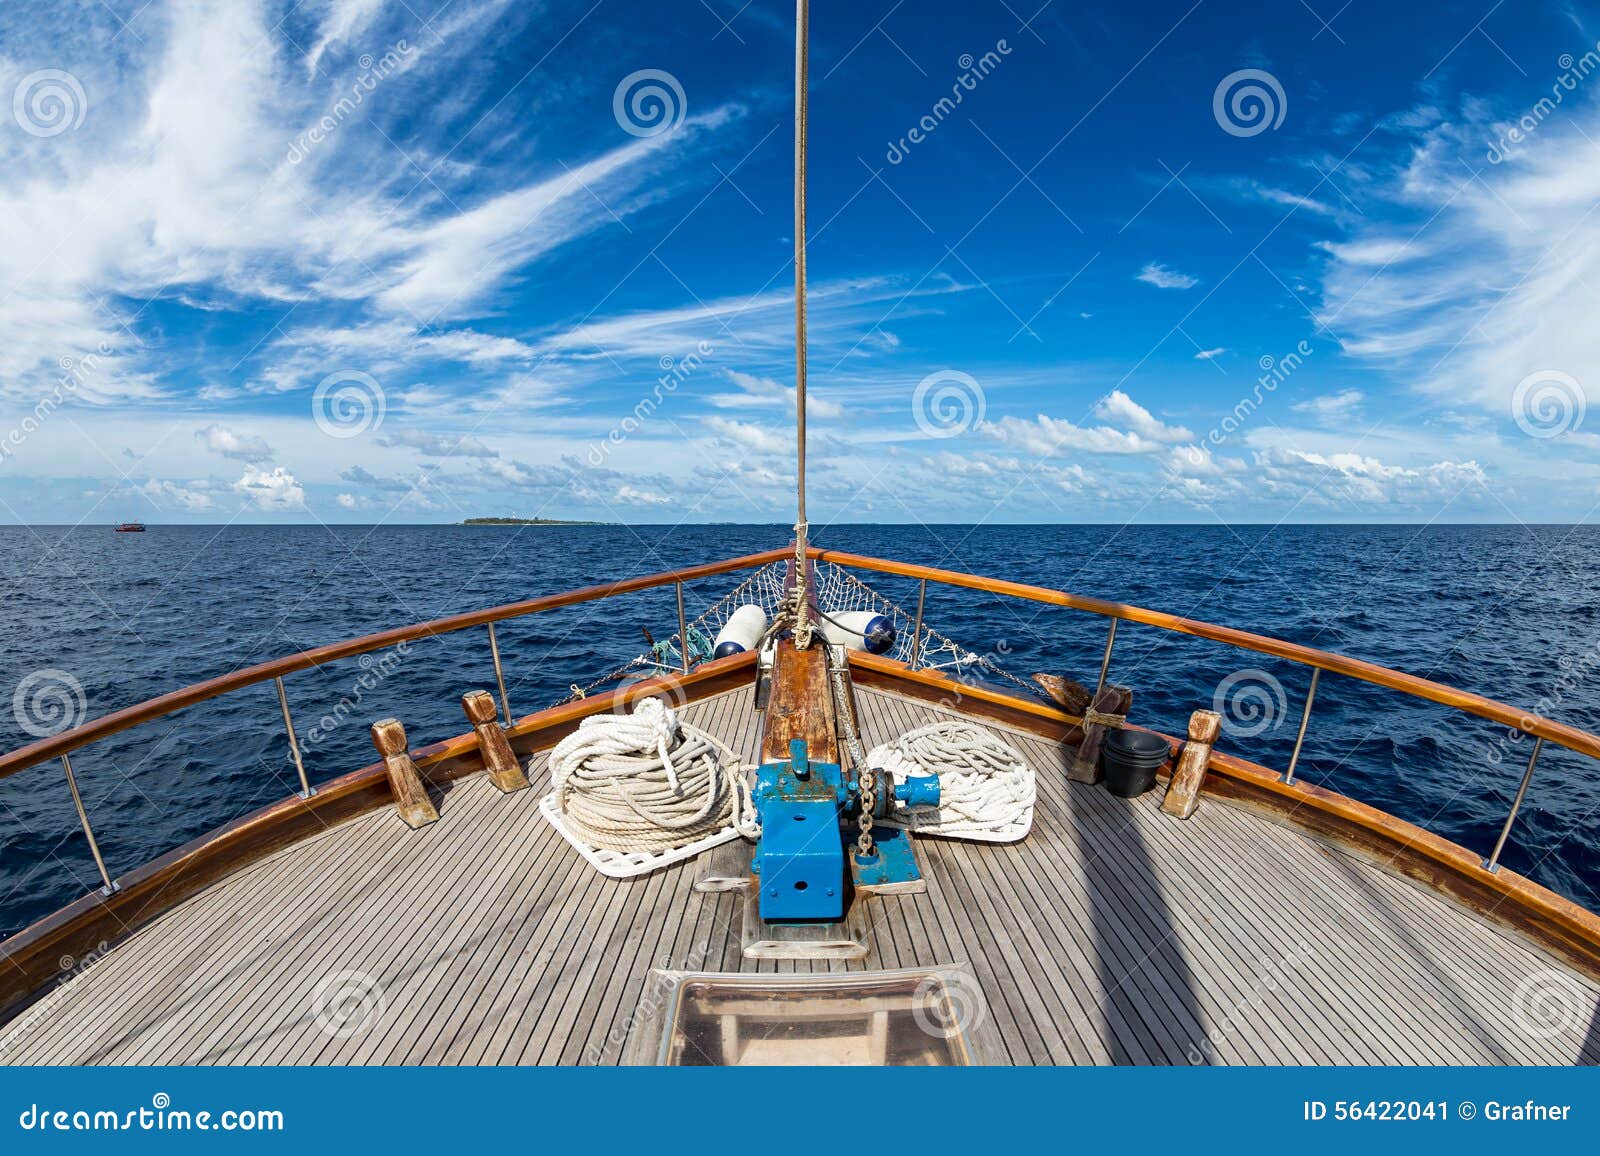 Sailing boat on the wide open ocean.